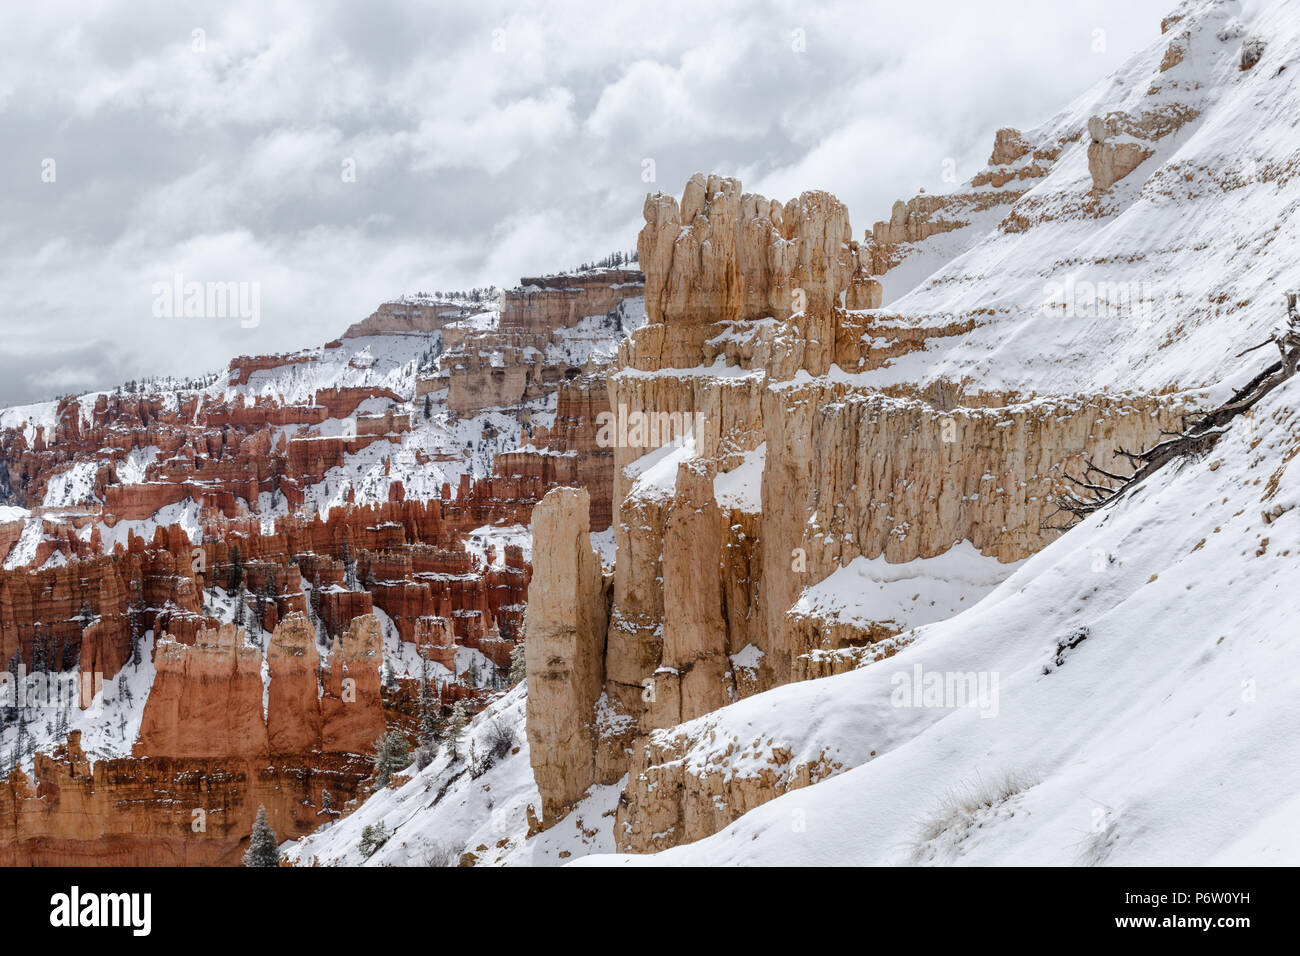 Rocky outcrop with snow with hoodoos in the background; Bryce Canyon National Park, Utah. Stock Photo